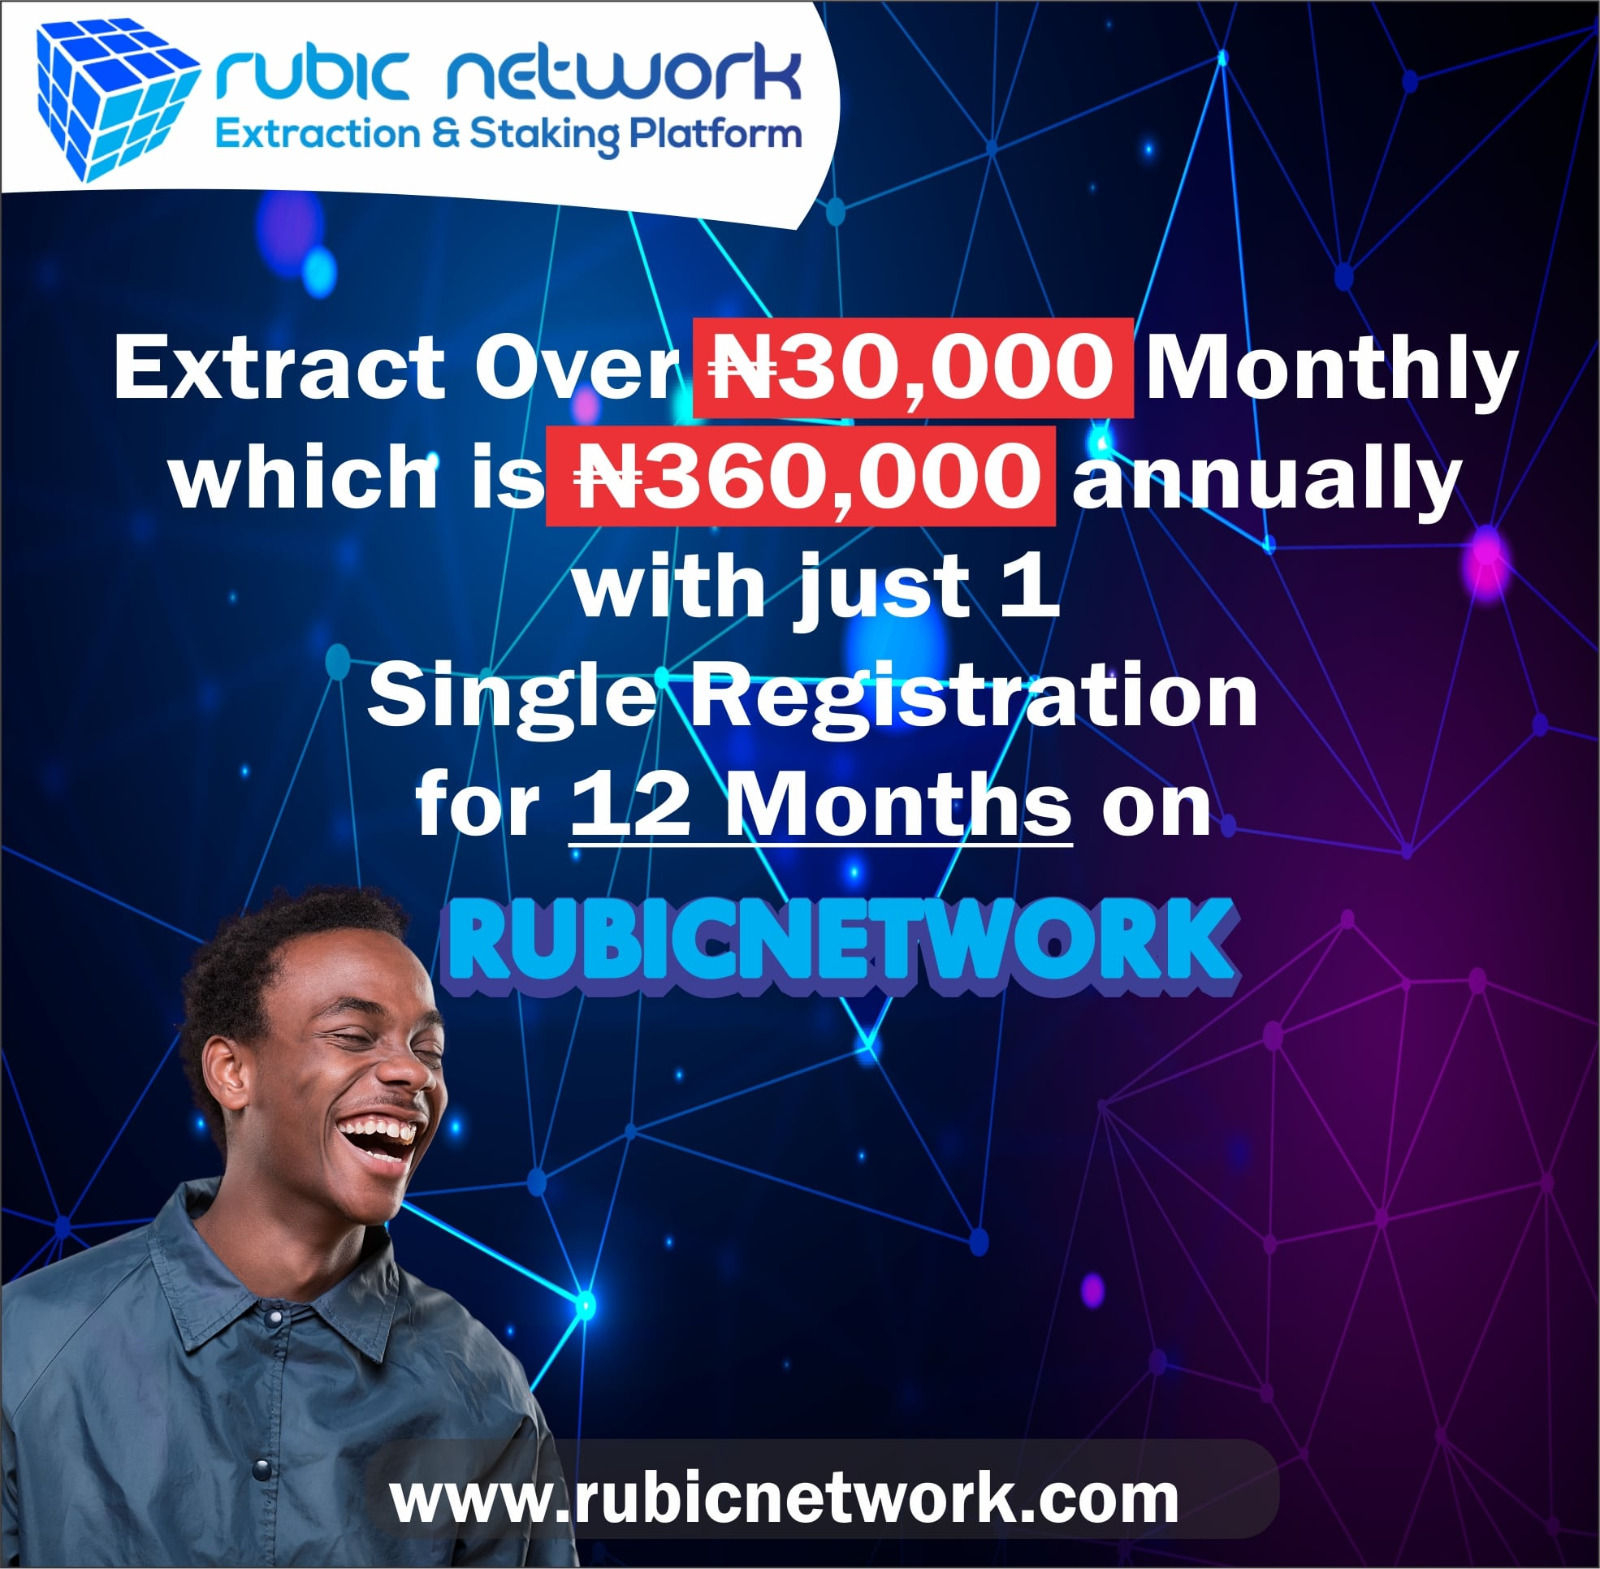 Rubicnetwork.com | Make Up to N35,000 Monthly and N420K Annually by Extracting RUBIC Token!